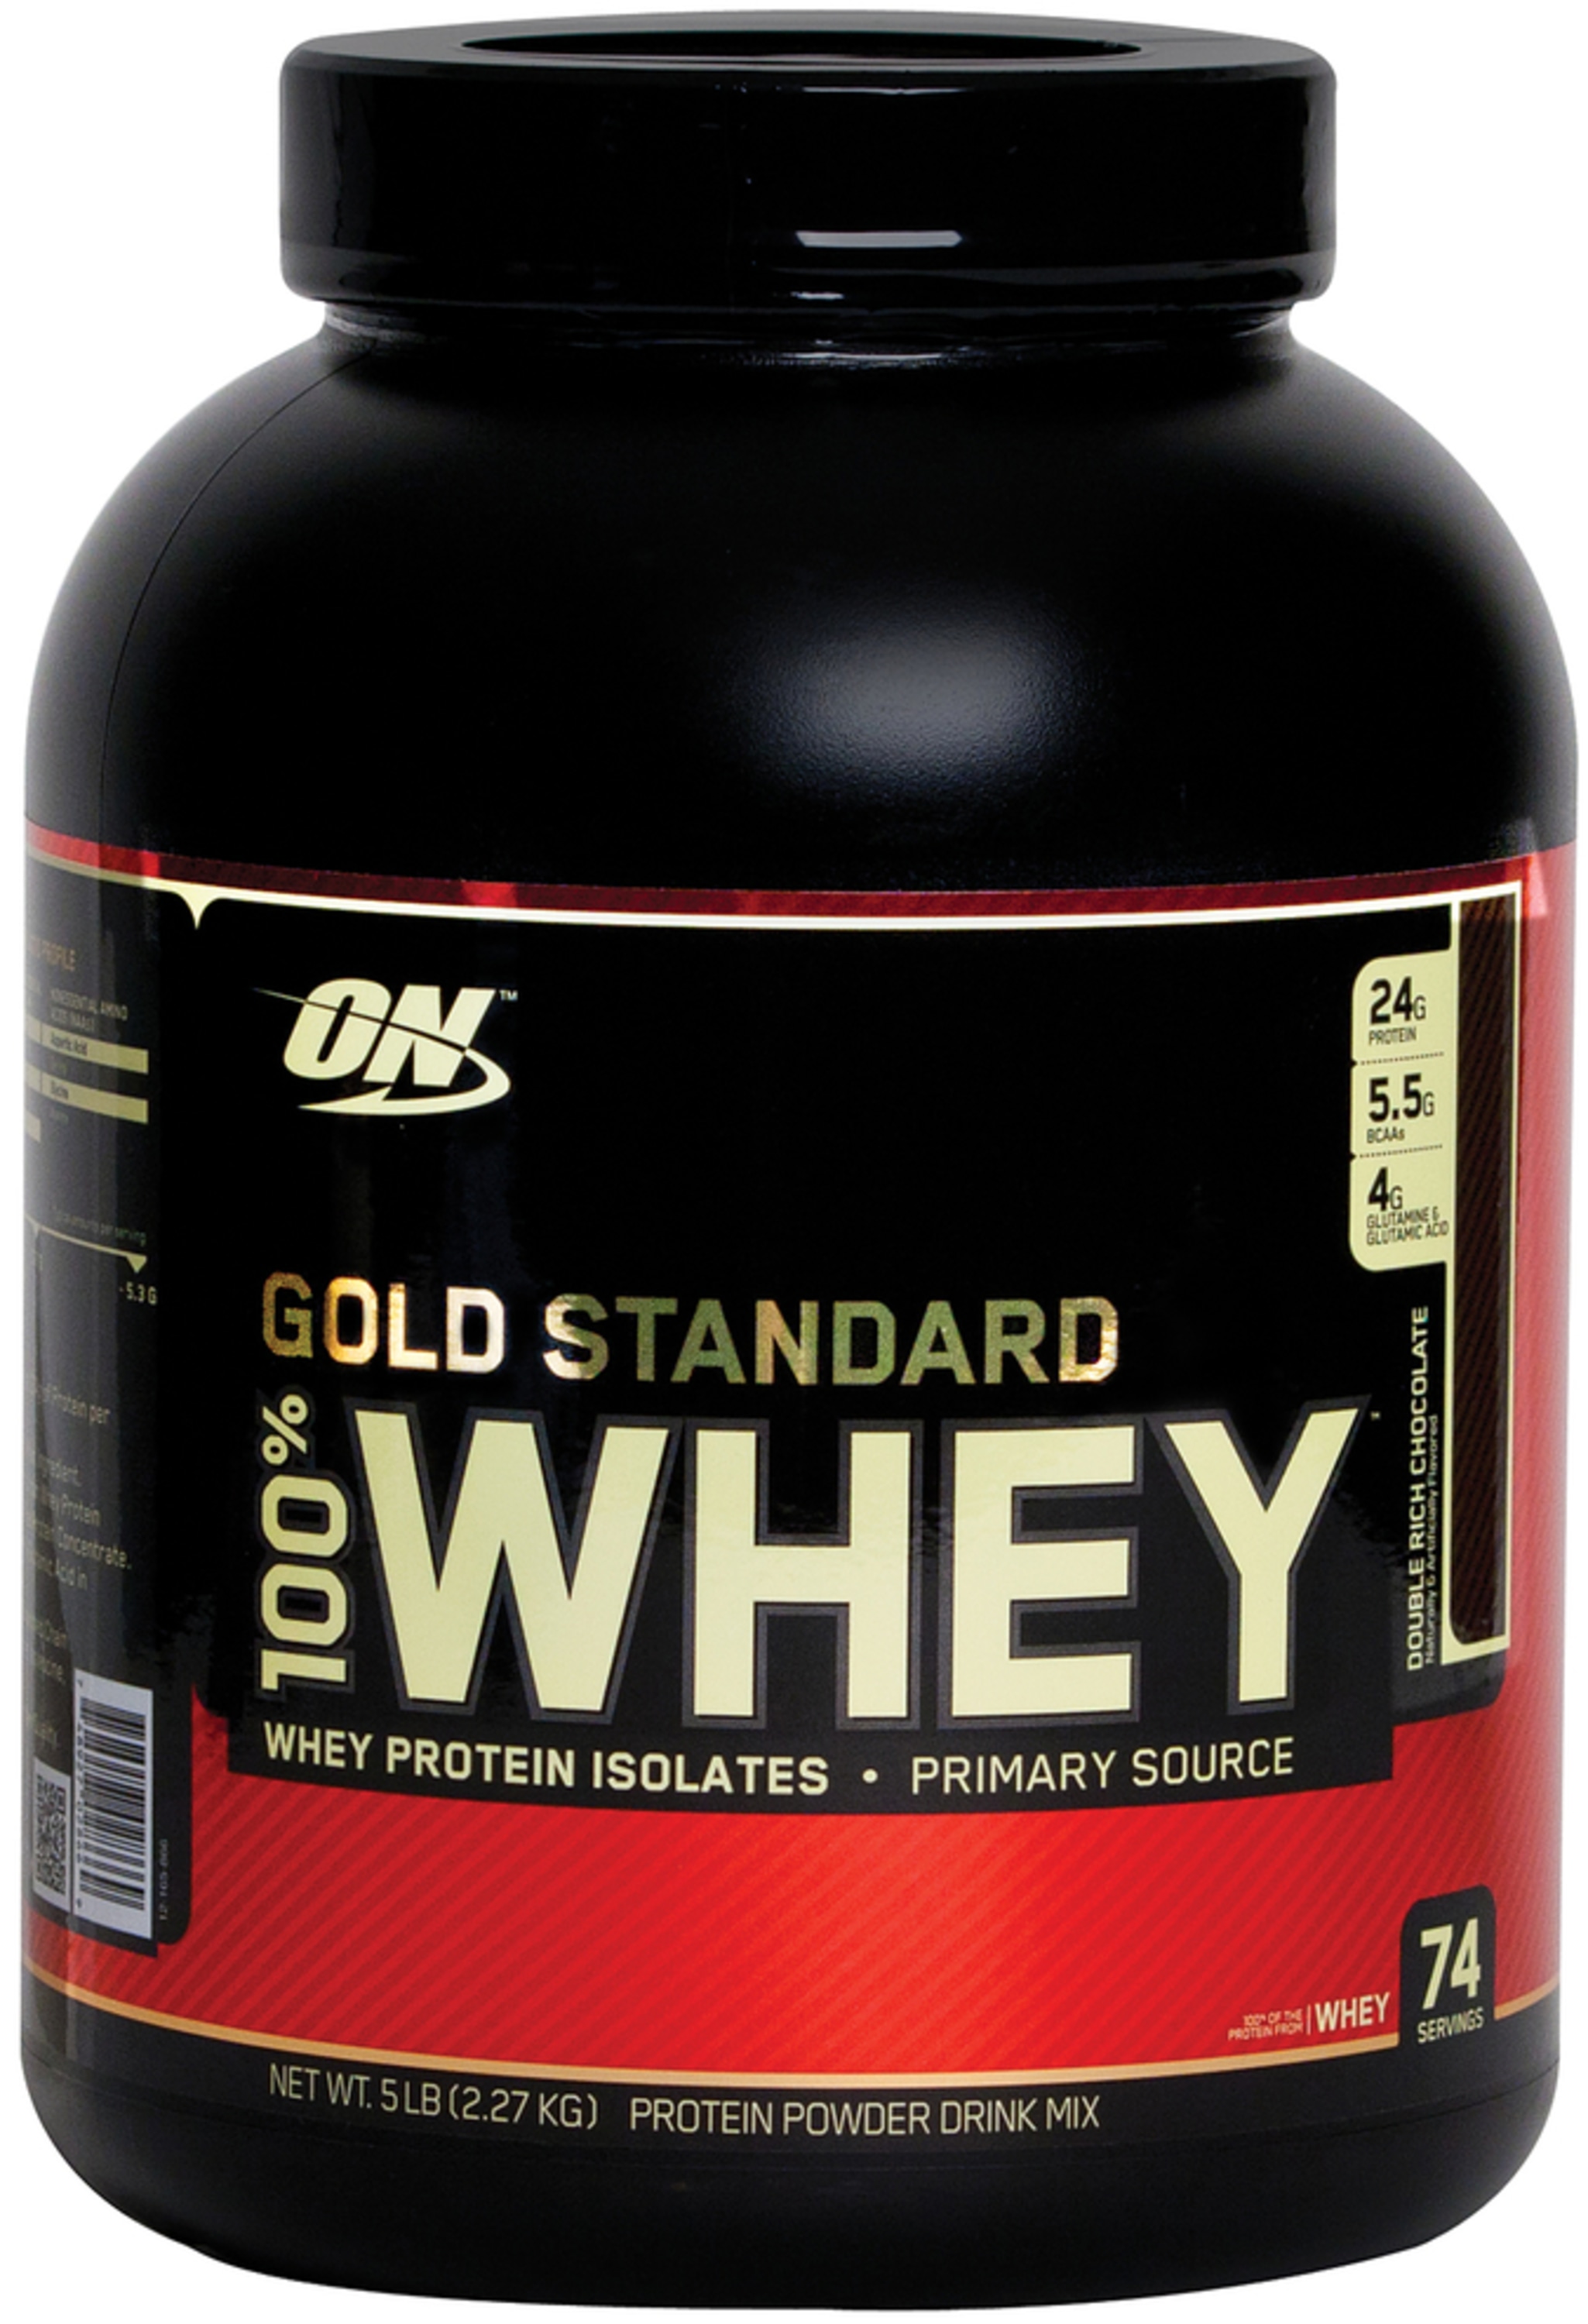 https://cdn2.pipingrock.com/images/product/amazon/product/gold-standard-100-whey-powder-double-rich-chocolate-5-lb-227-kg-bottle-41367.jpg?tx=w_3000,h_3000,c_fit&v=3